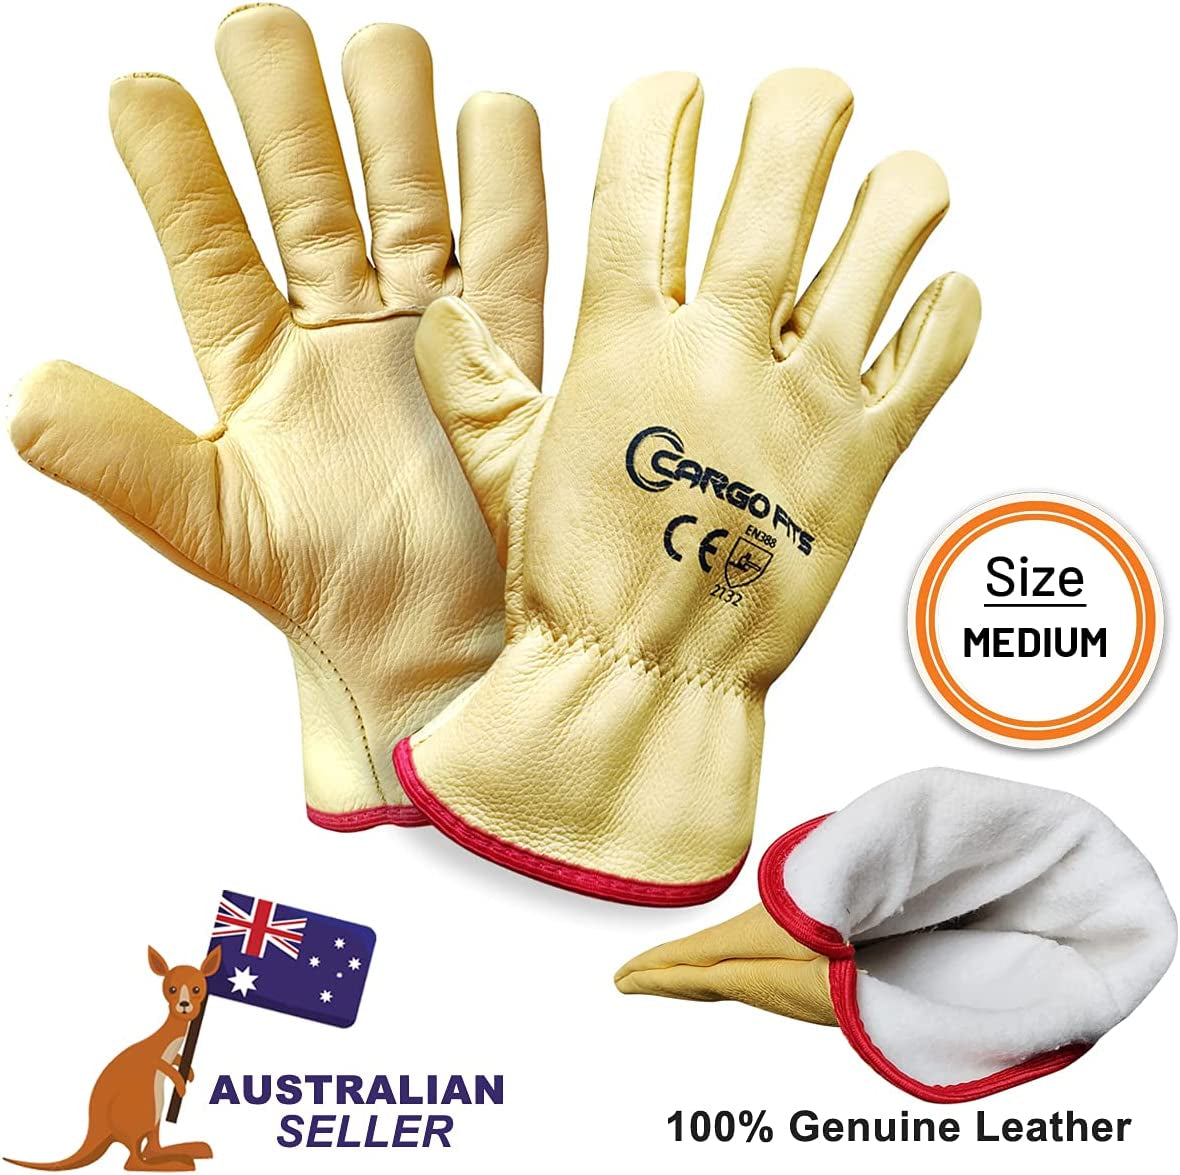 Cargo Fits, Genuine Premium Leather Work Gloves with Fleece Lined Thermal Cold Work Heavy Duty - Medium Size